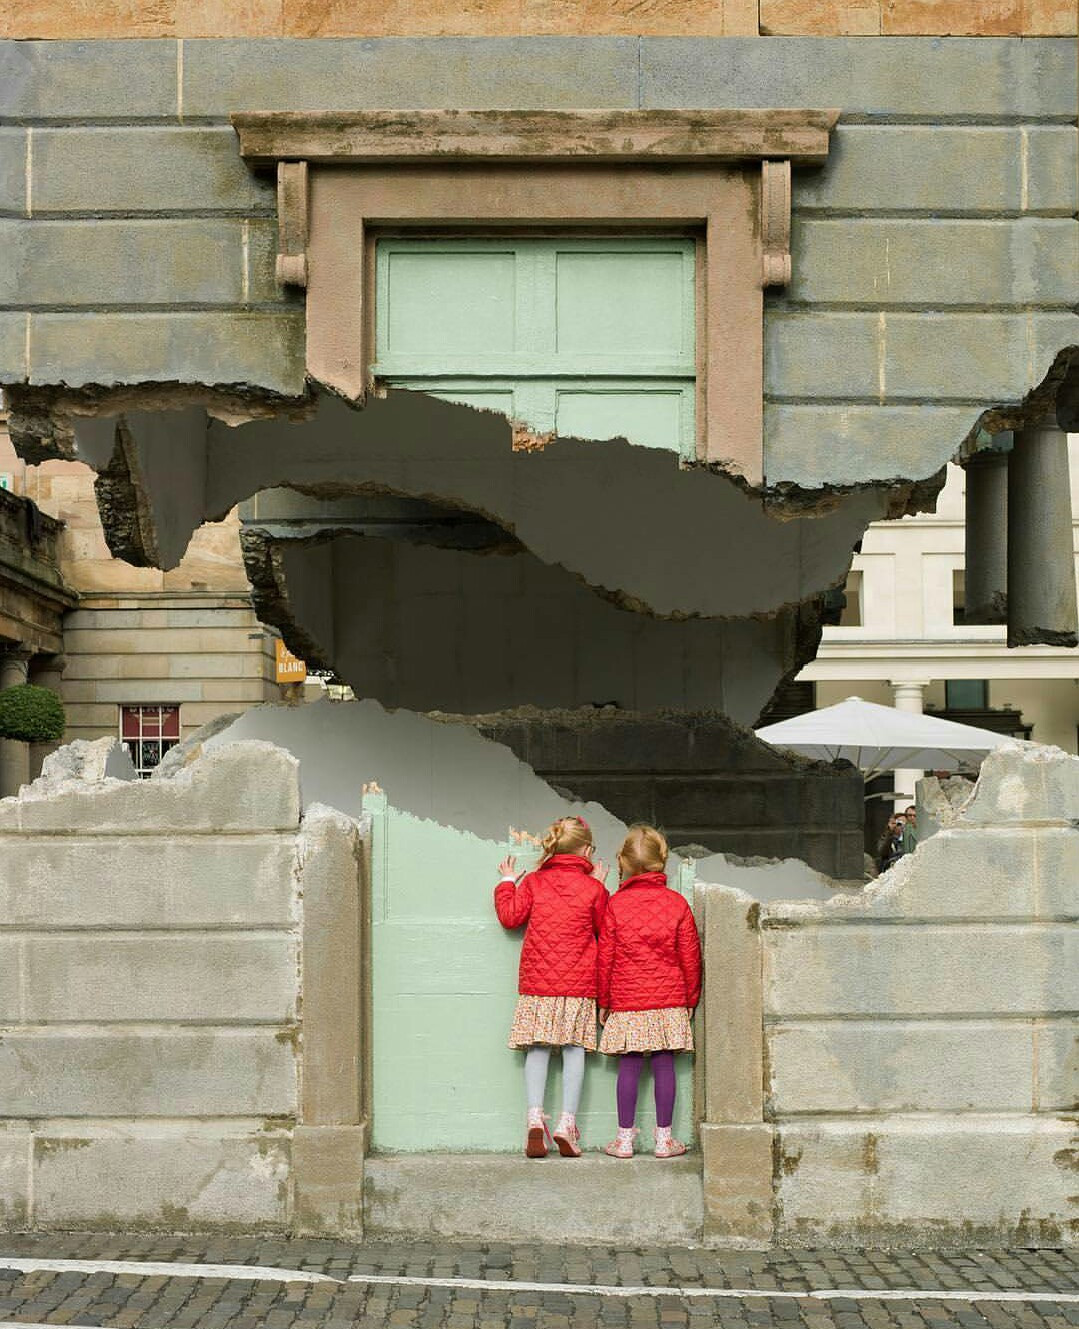 The Mind Blowing Sculptures And Architectural Interventions Of Alex Chinneck 16